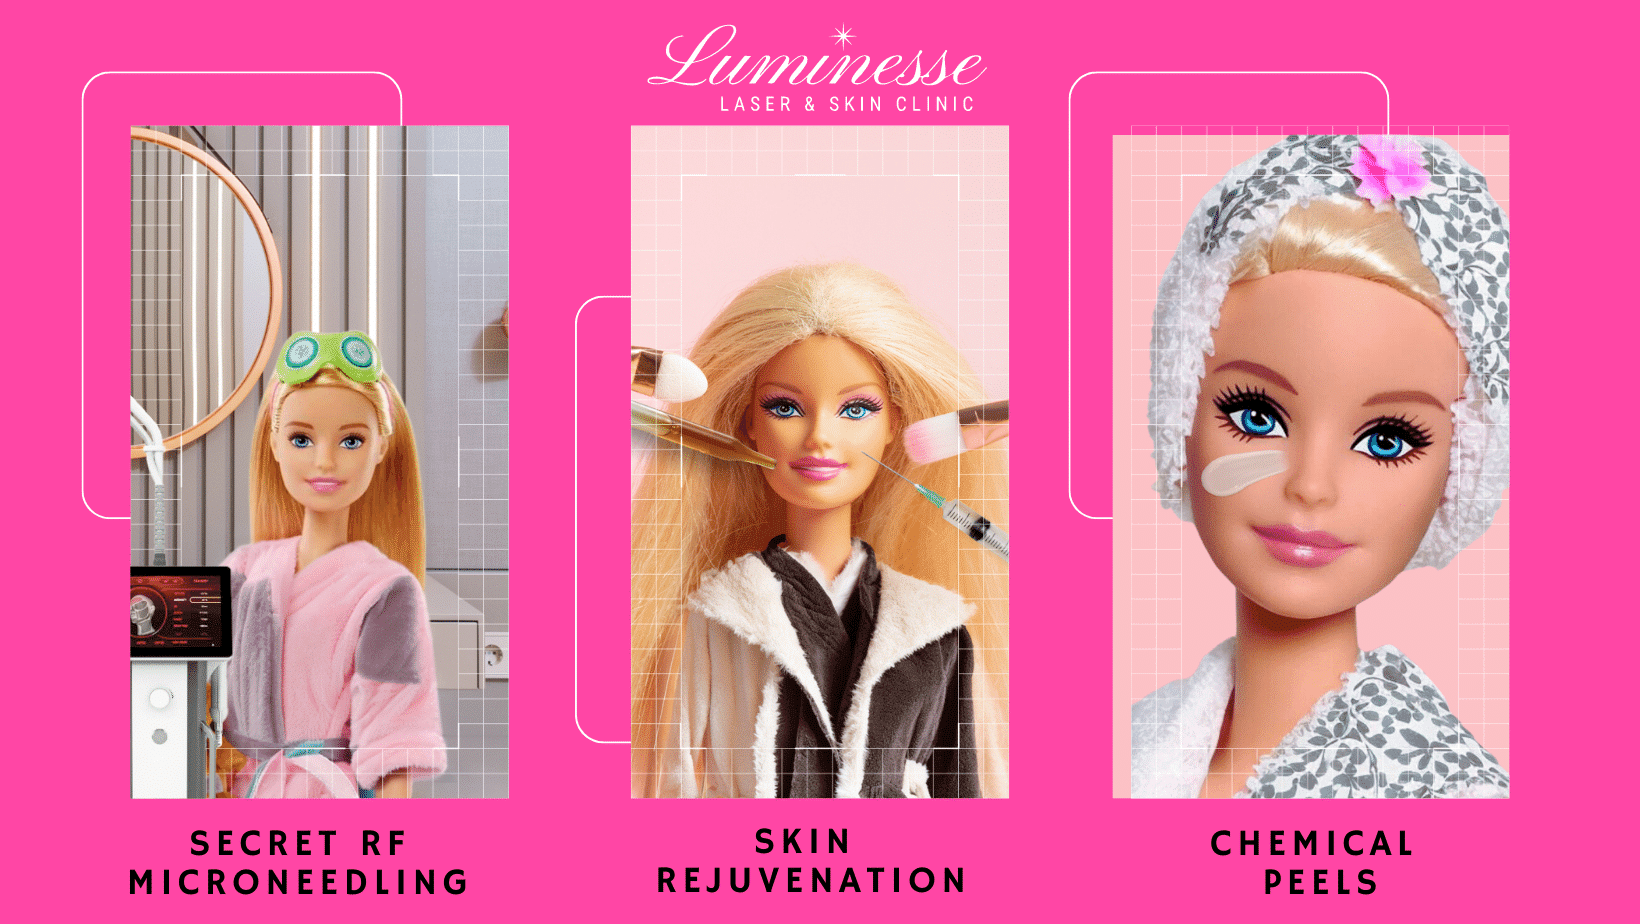 achieving-barbie-like-glowing-skin-with-luminesse-lasers-cosmetic-treatments